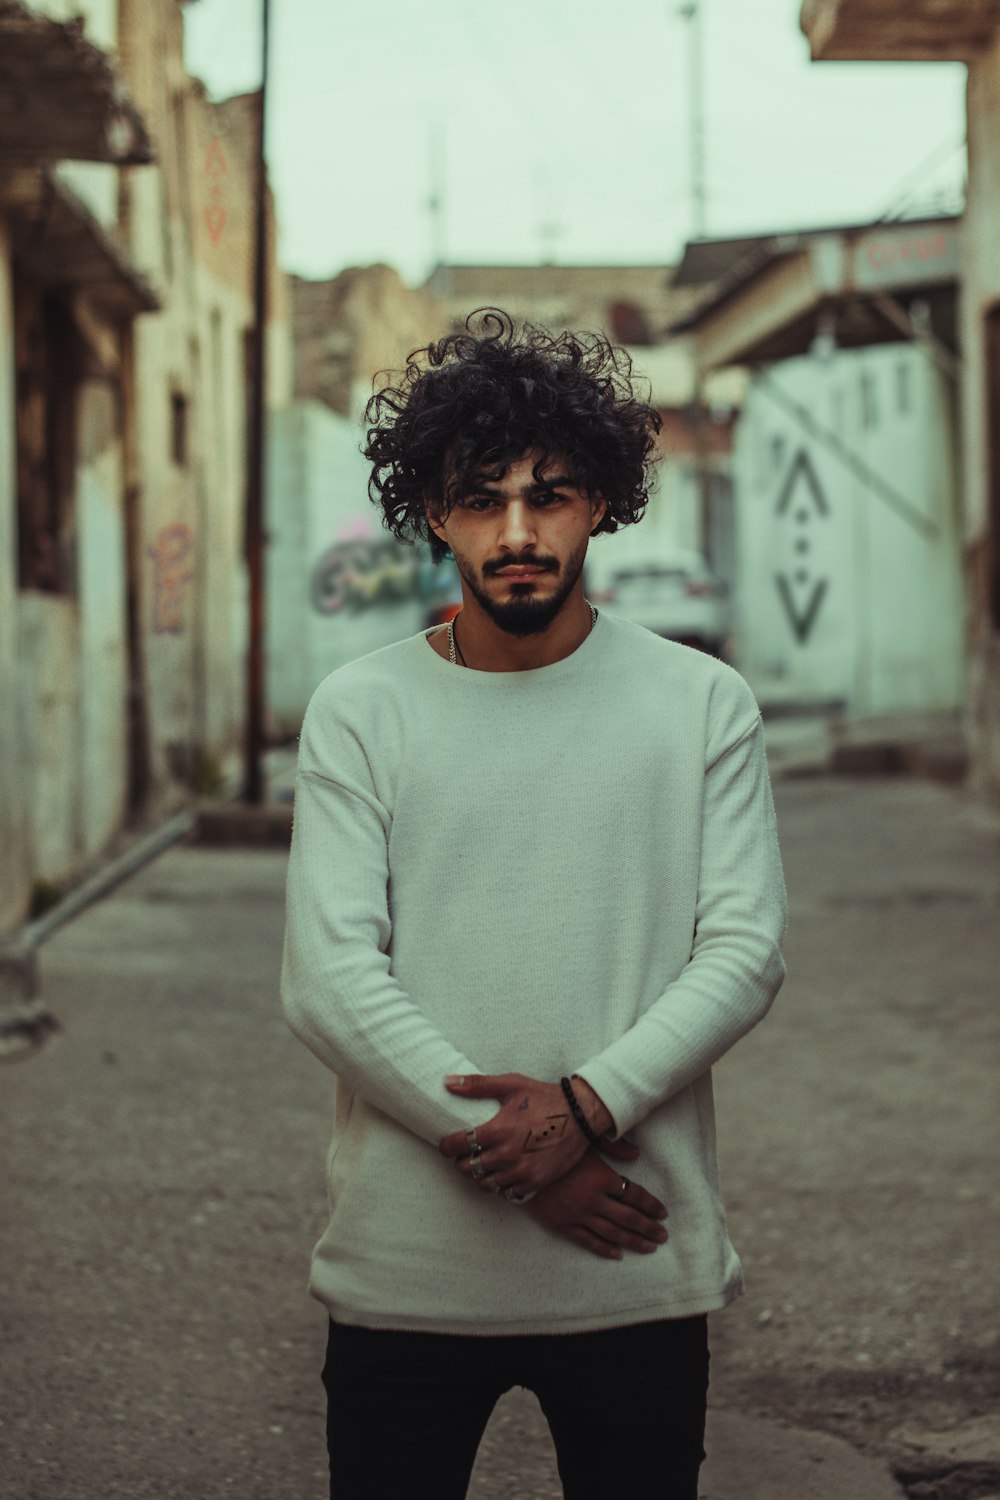 a man with curly hair standing in an alley